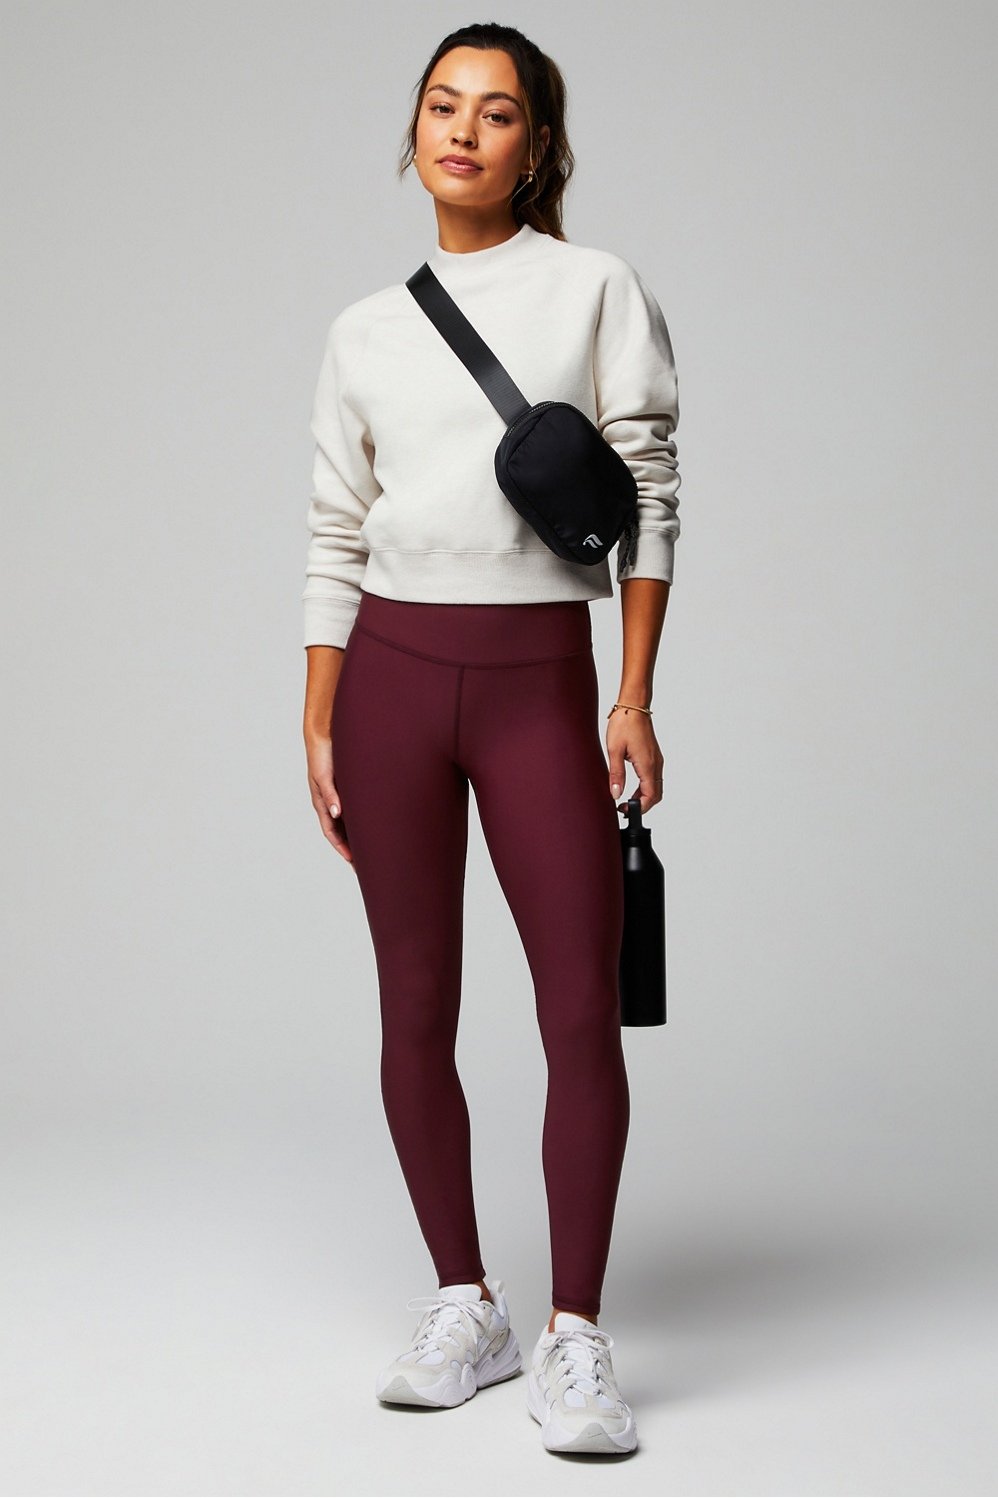 Burgundy Leggings with Pumps Warm Weather Outfits (2 ideas